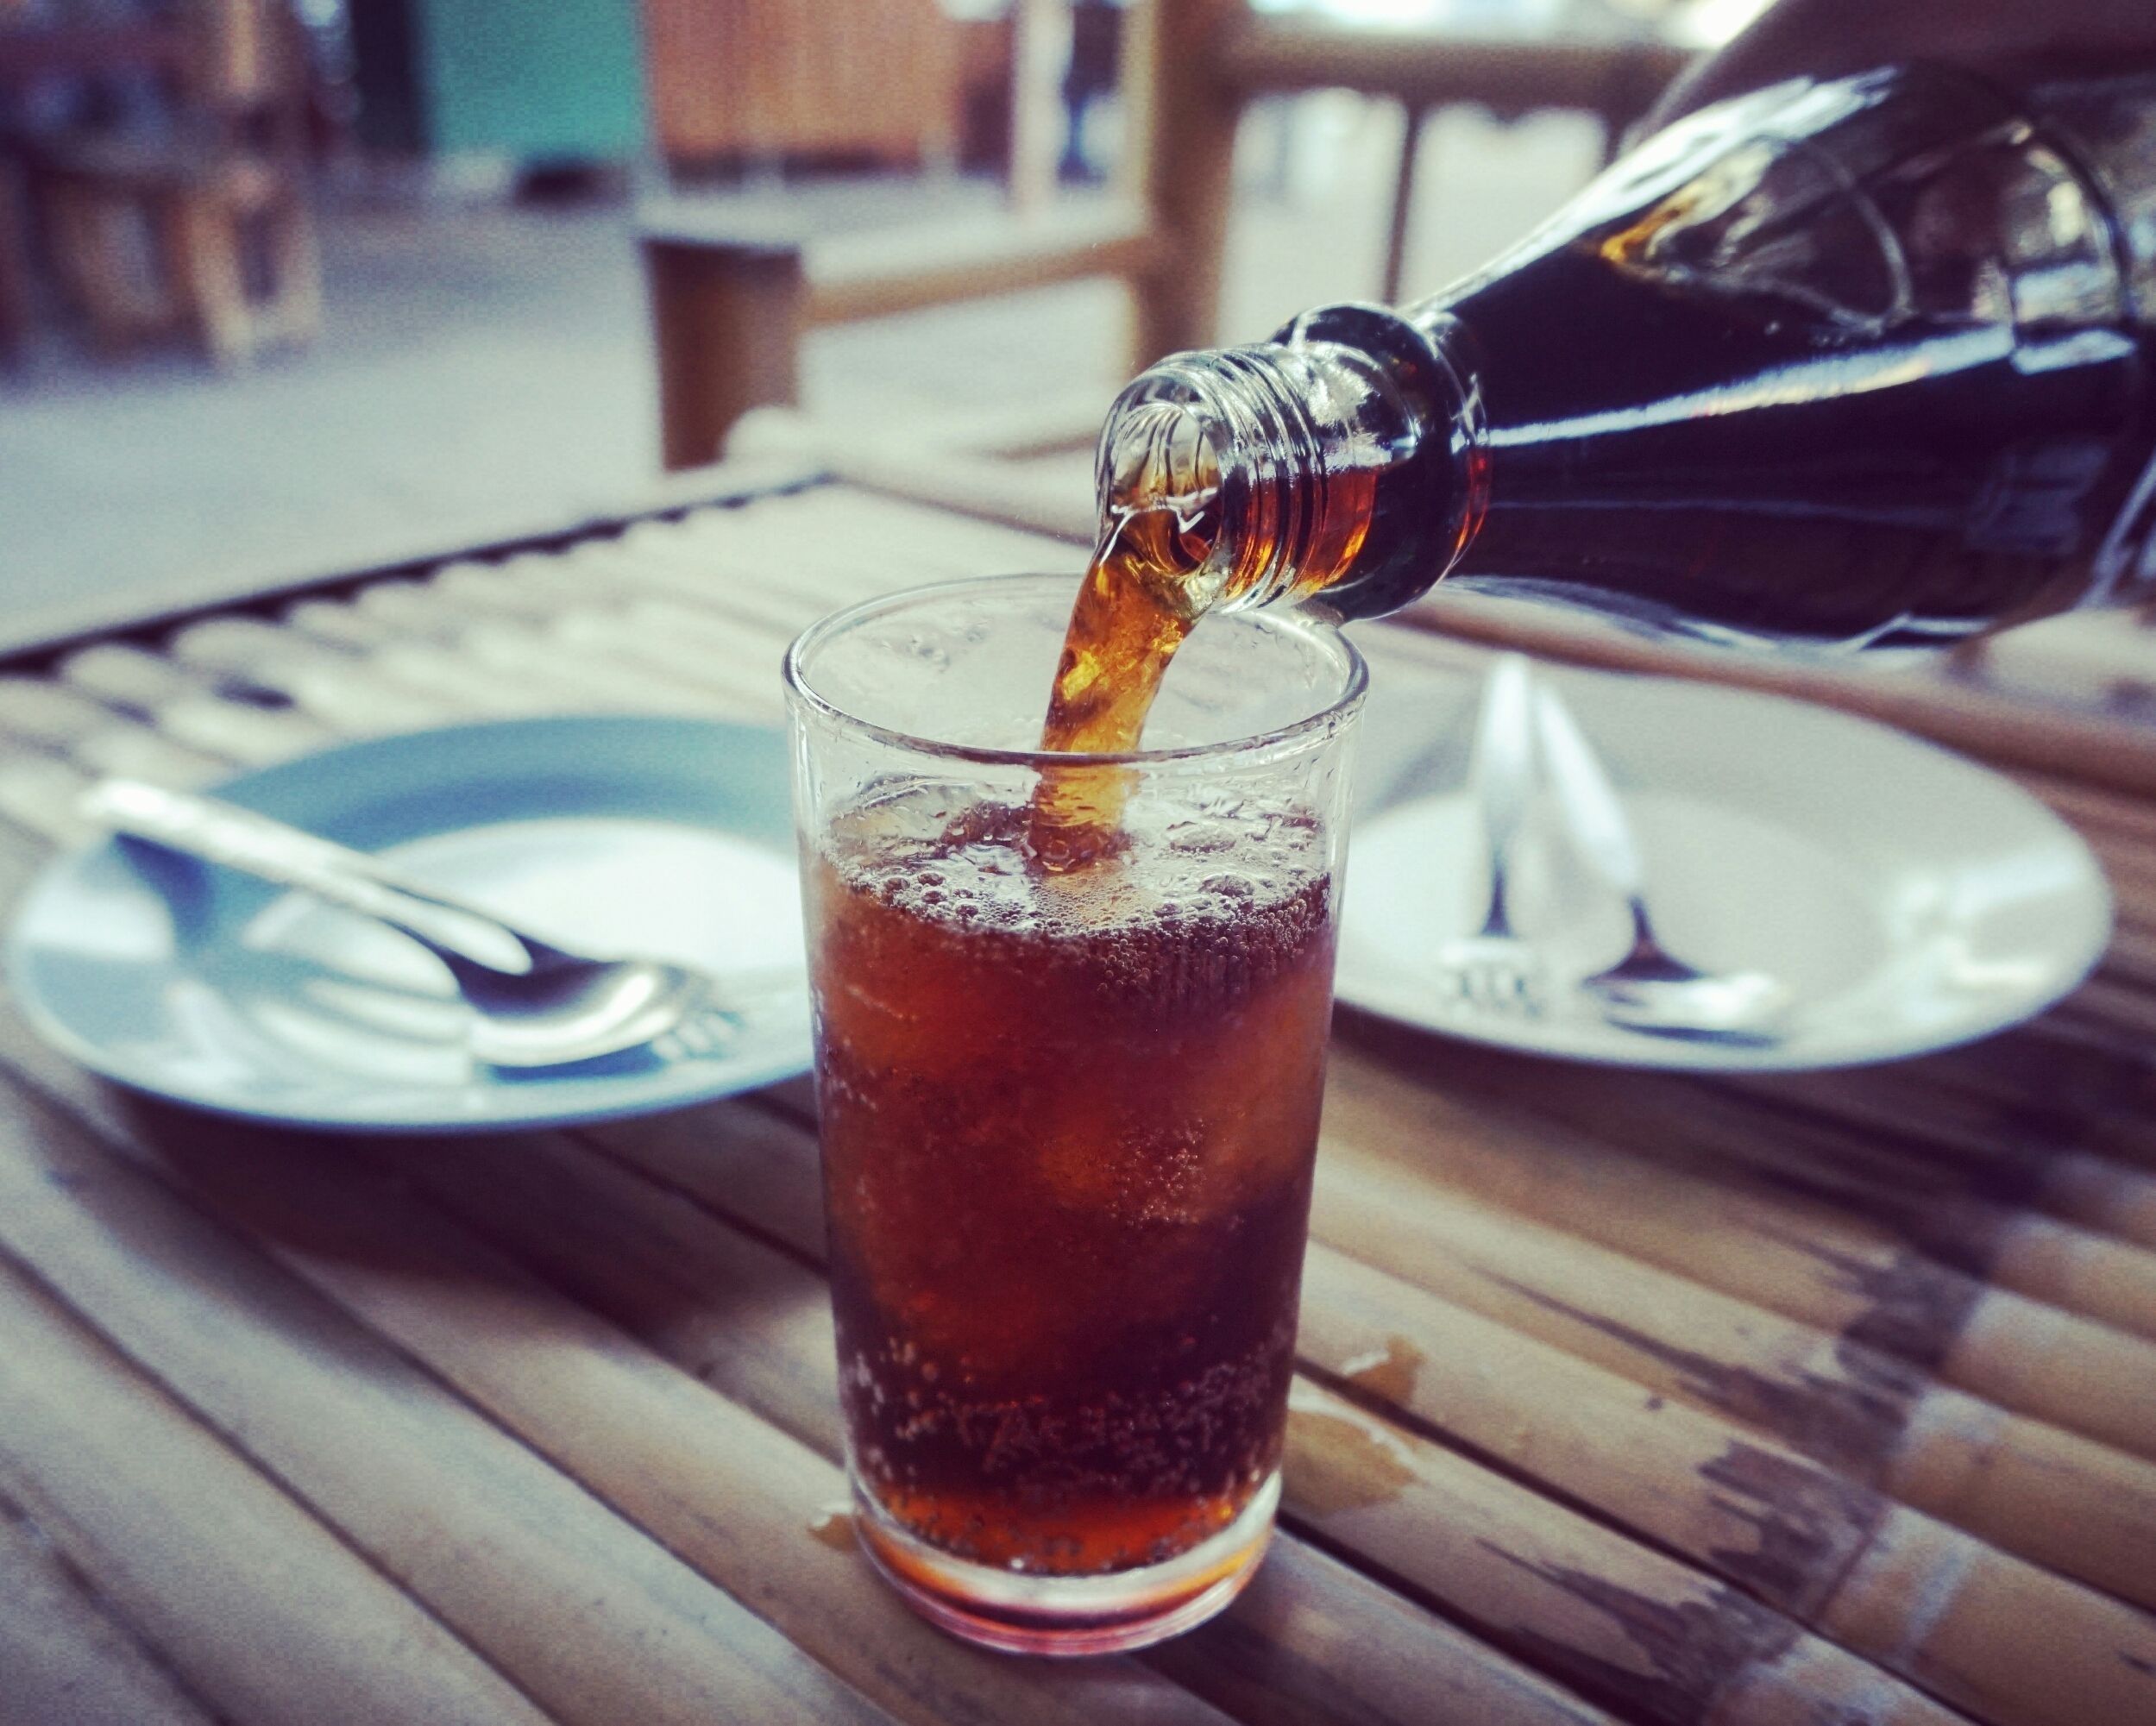 13 Ways that Sugary Soda is Bad for your Health